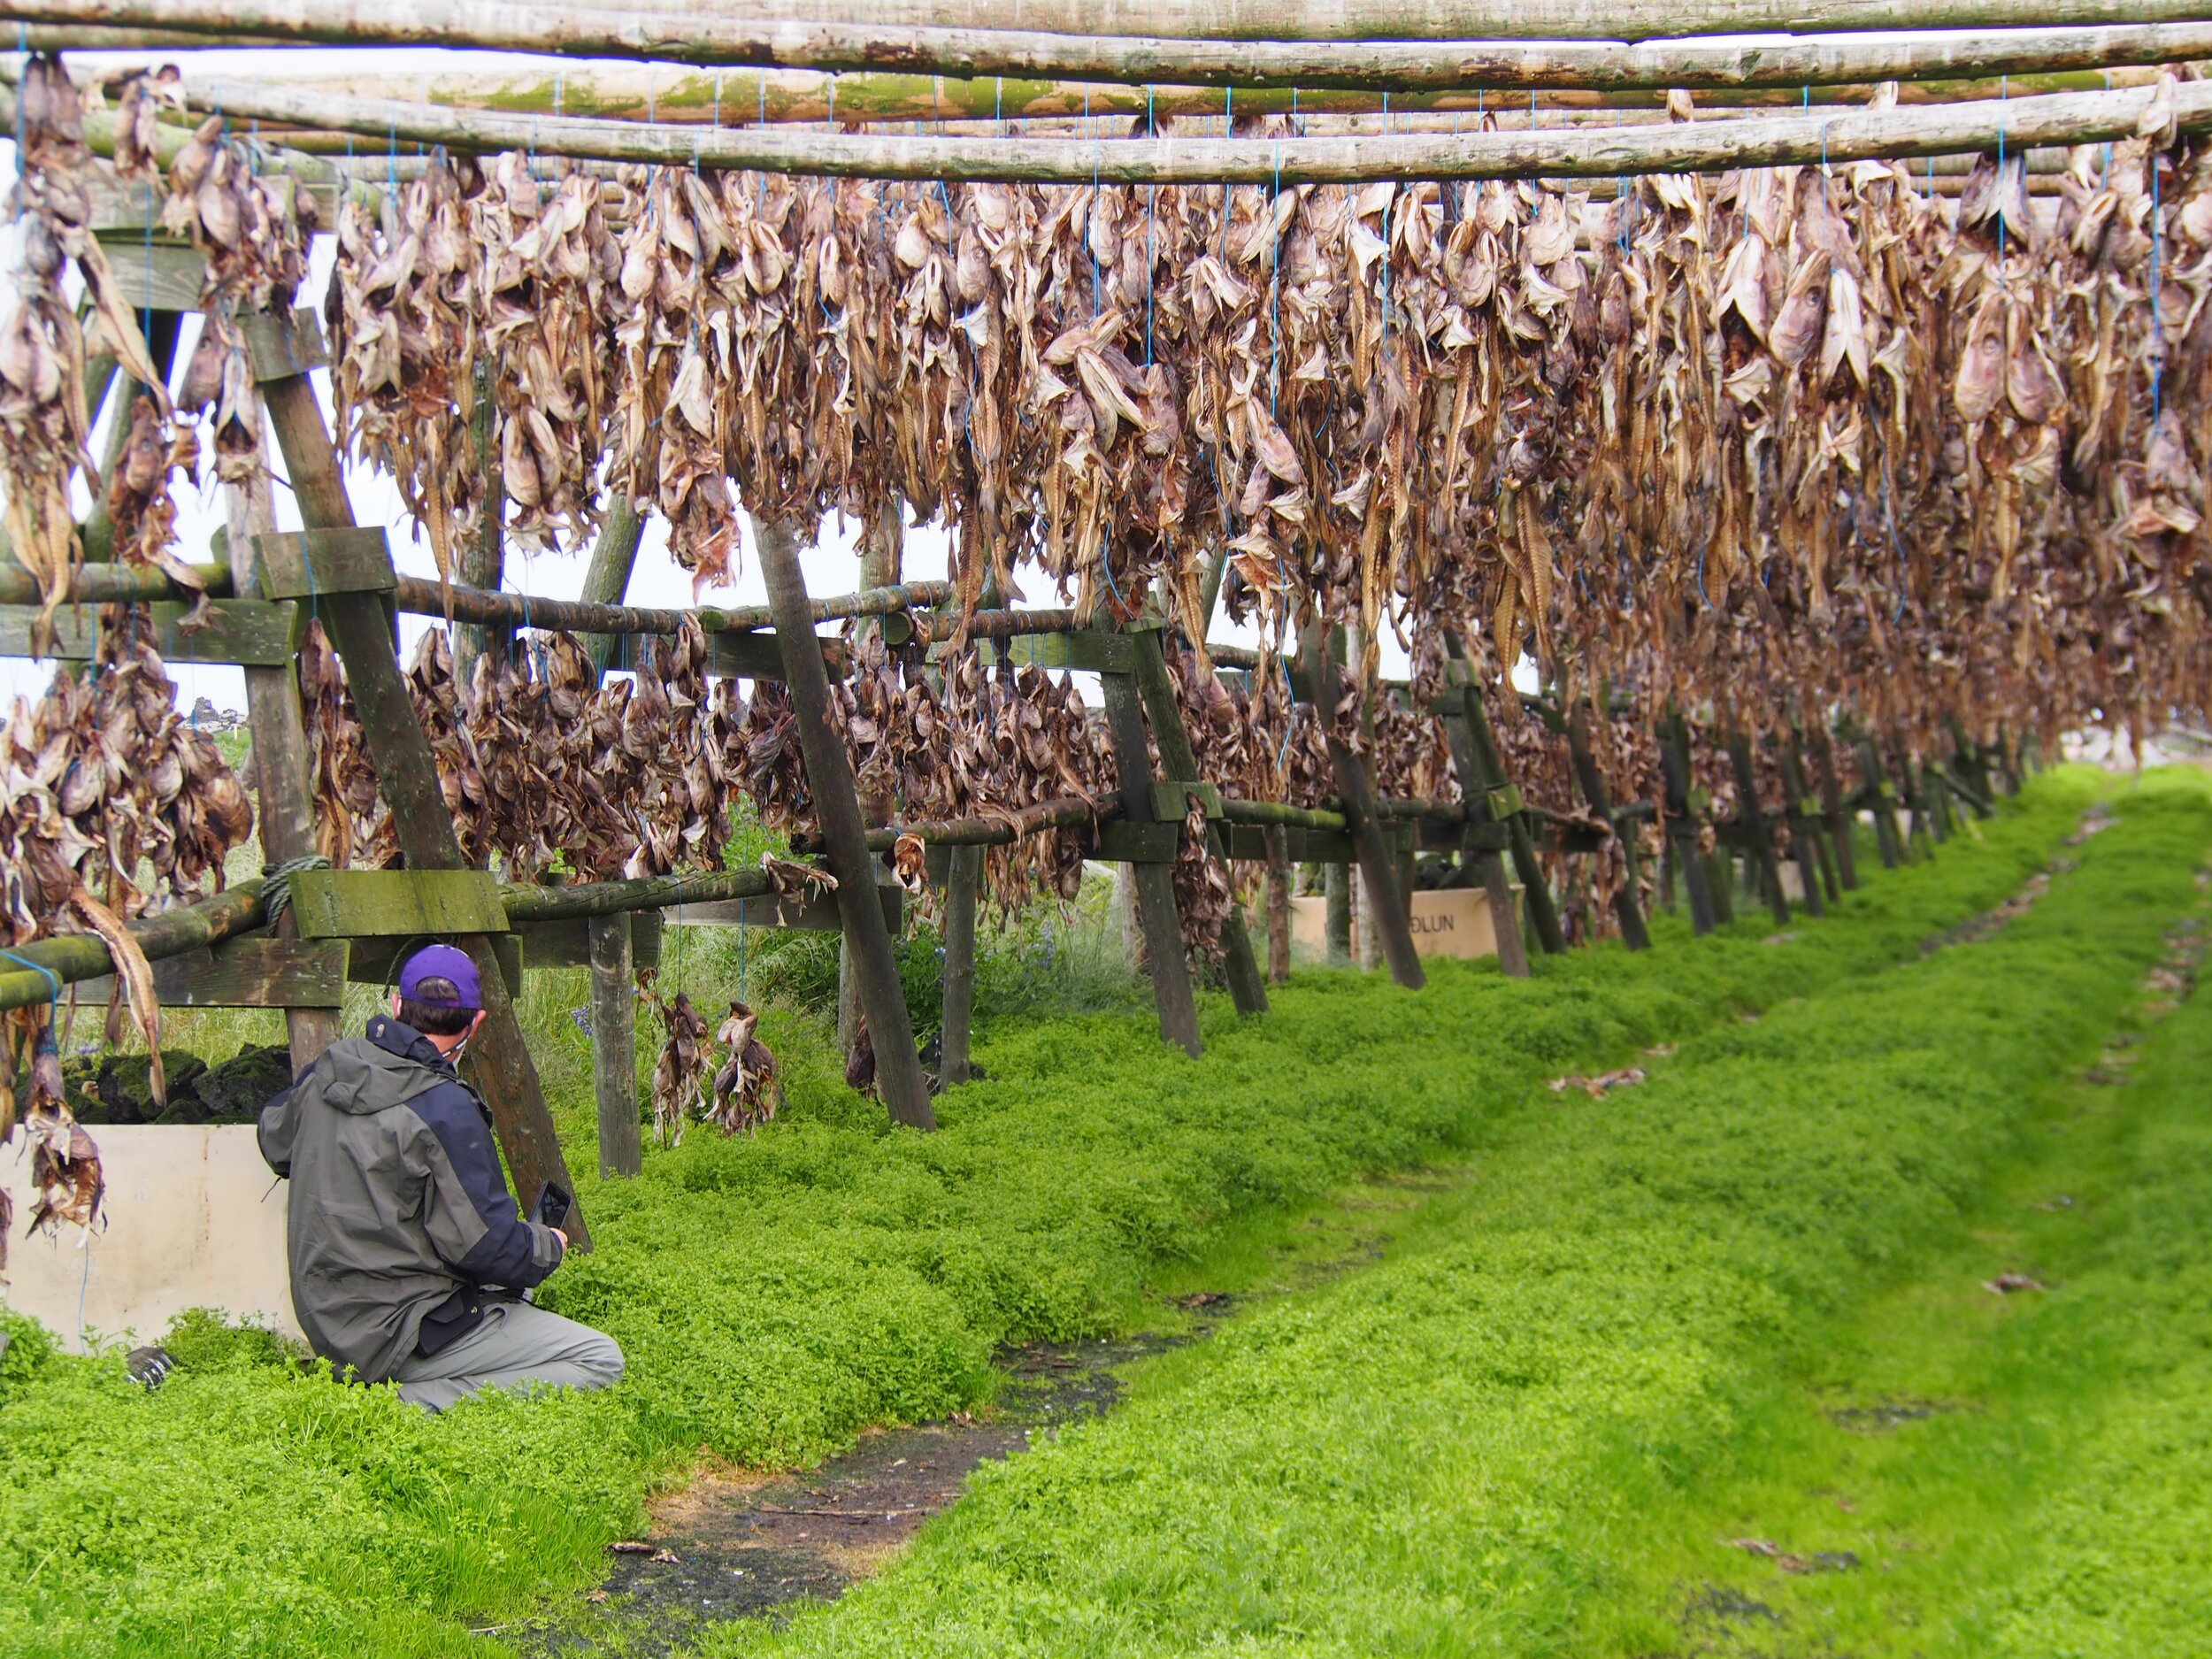 Debra S's photo of dried fish in Iceland